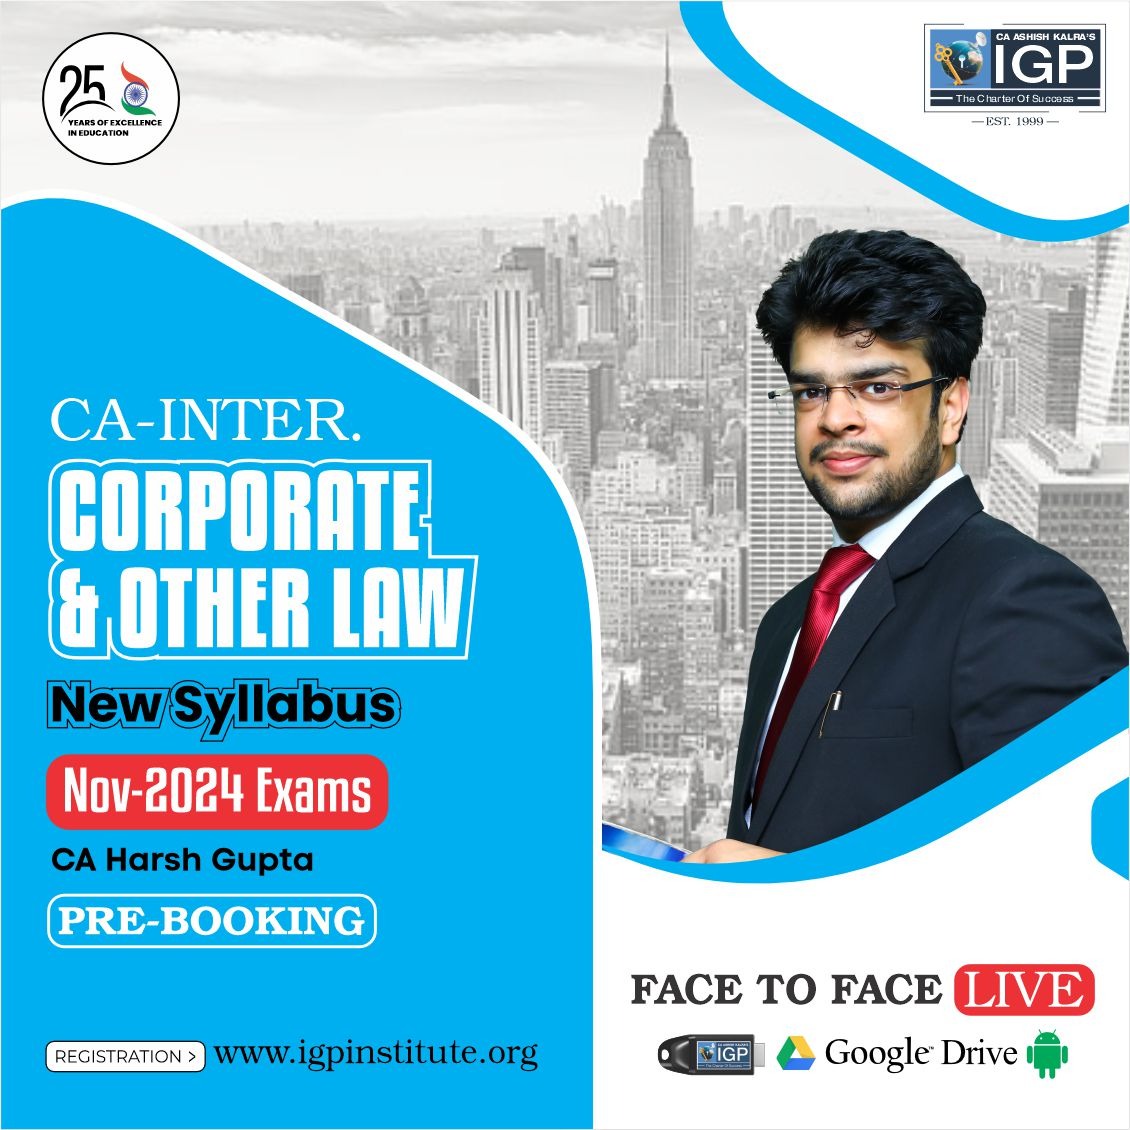 CA Inter LAW New Syllabus Nov 24 Exam Pre Booking-CA-INTER-Corporate Laws and Other Laws- CA Harsh Gupta